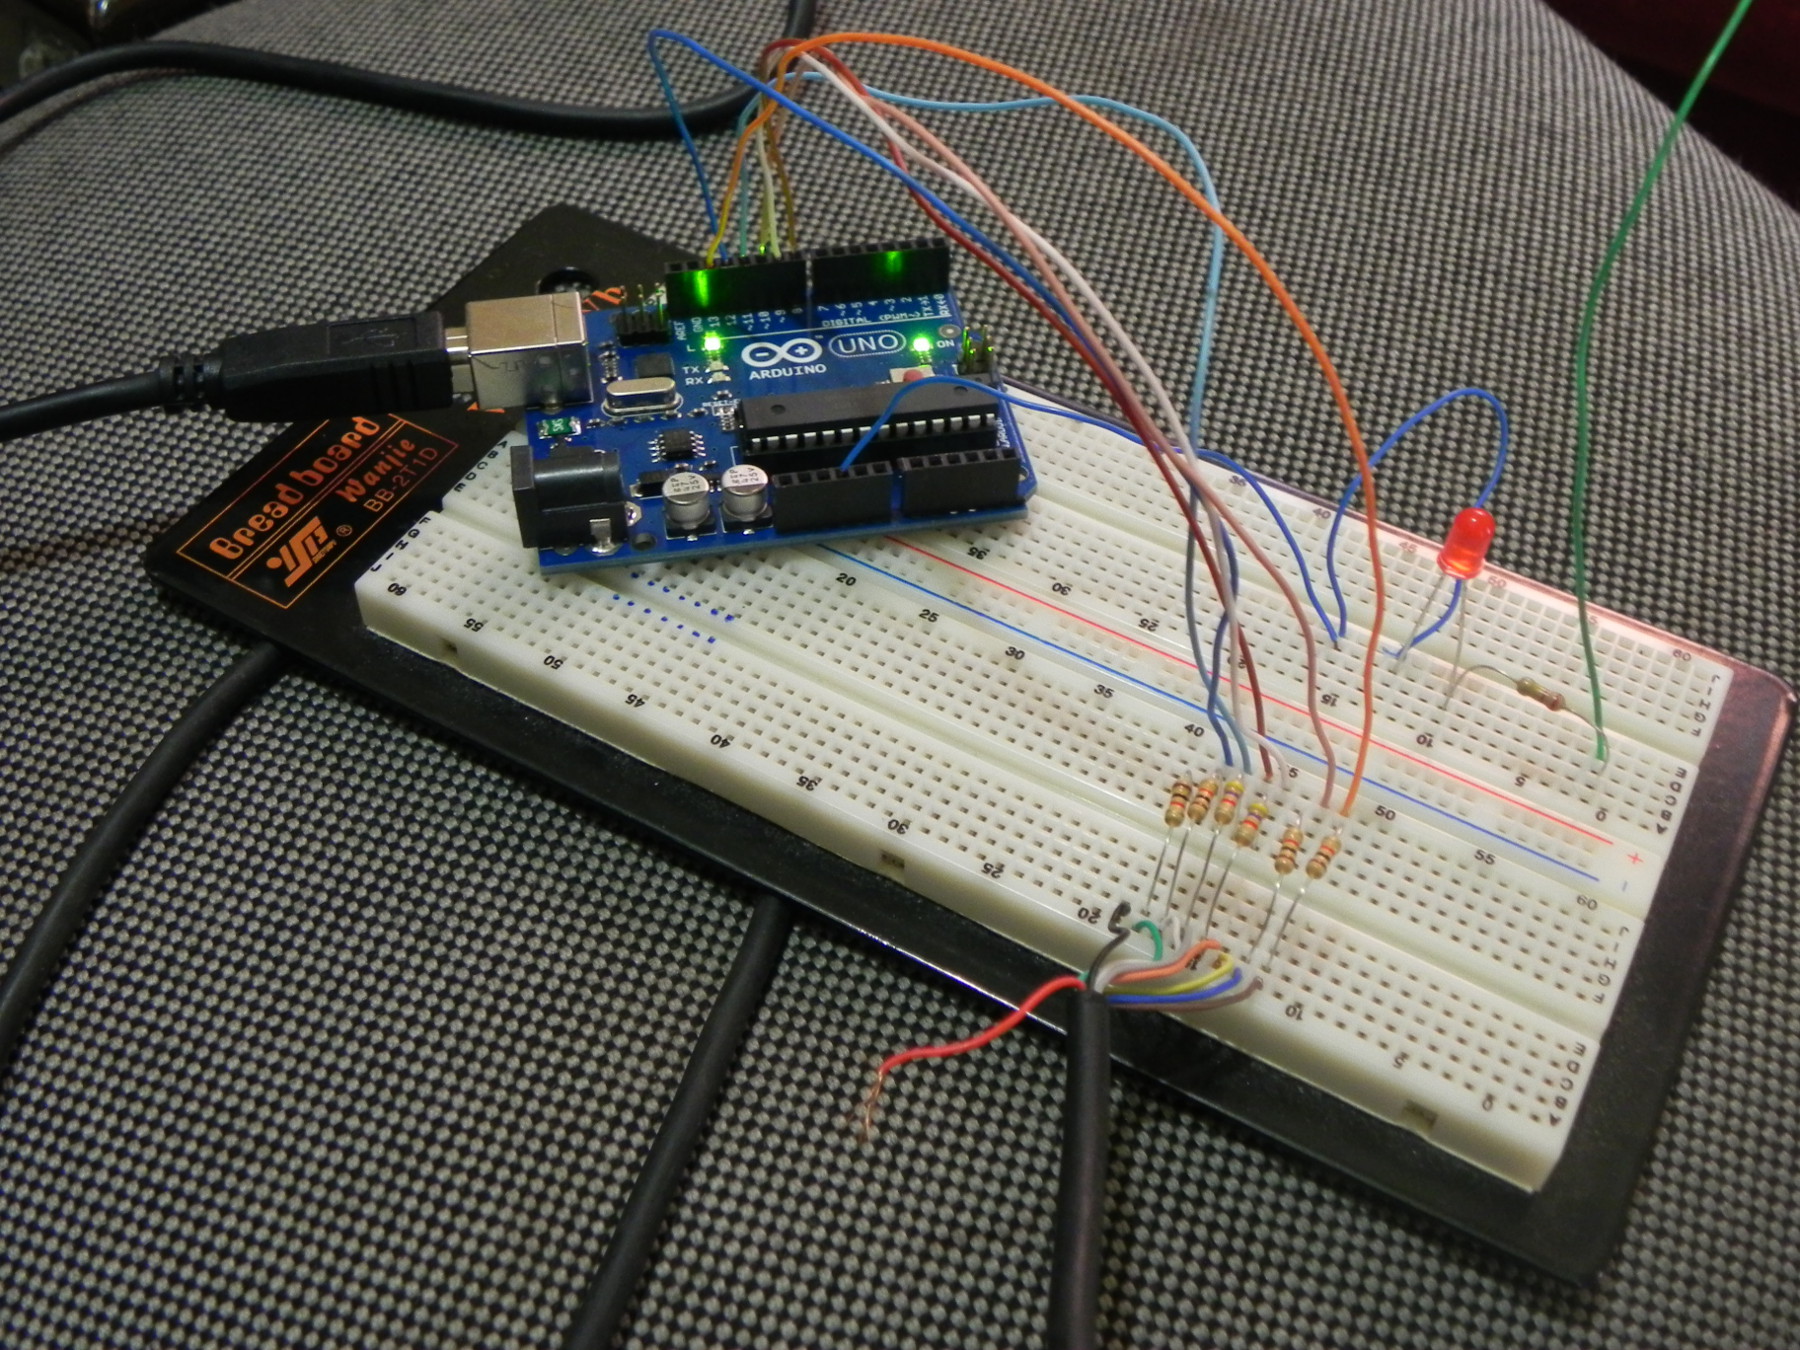 An arduino board connected to a breadboard